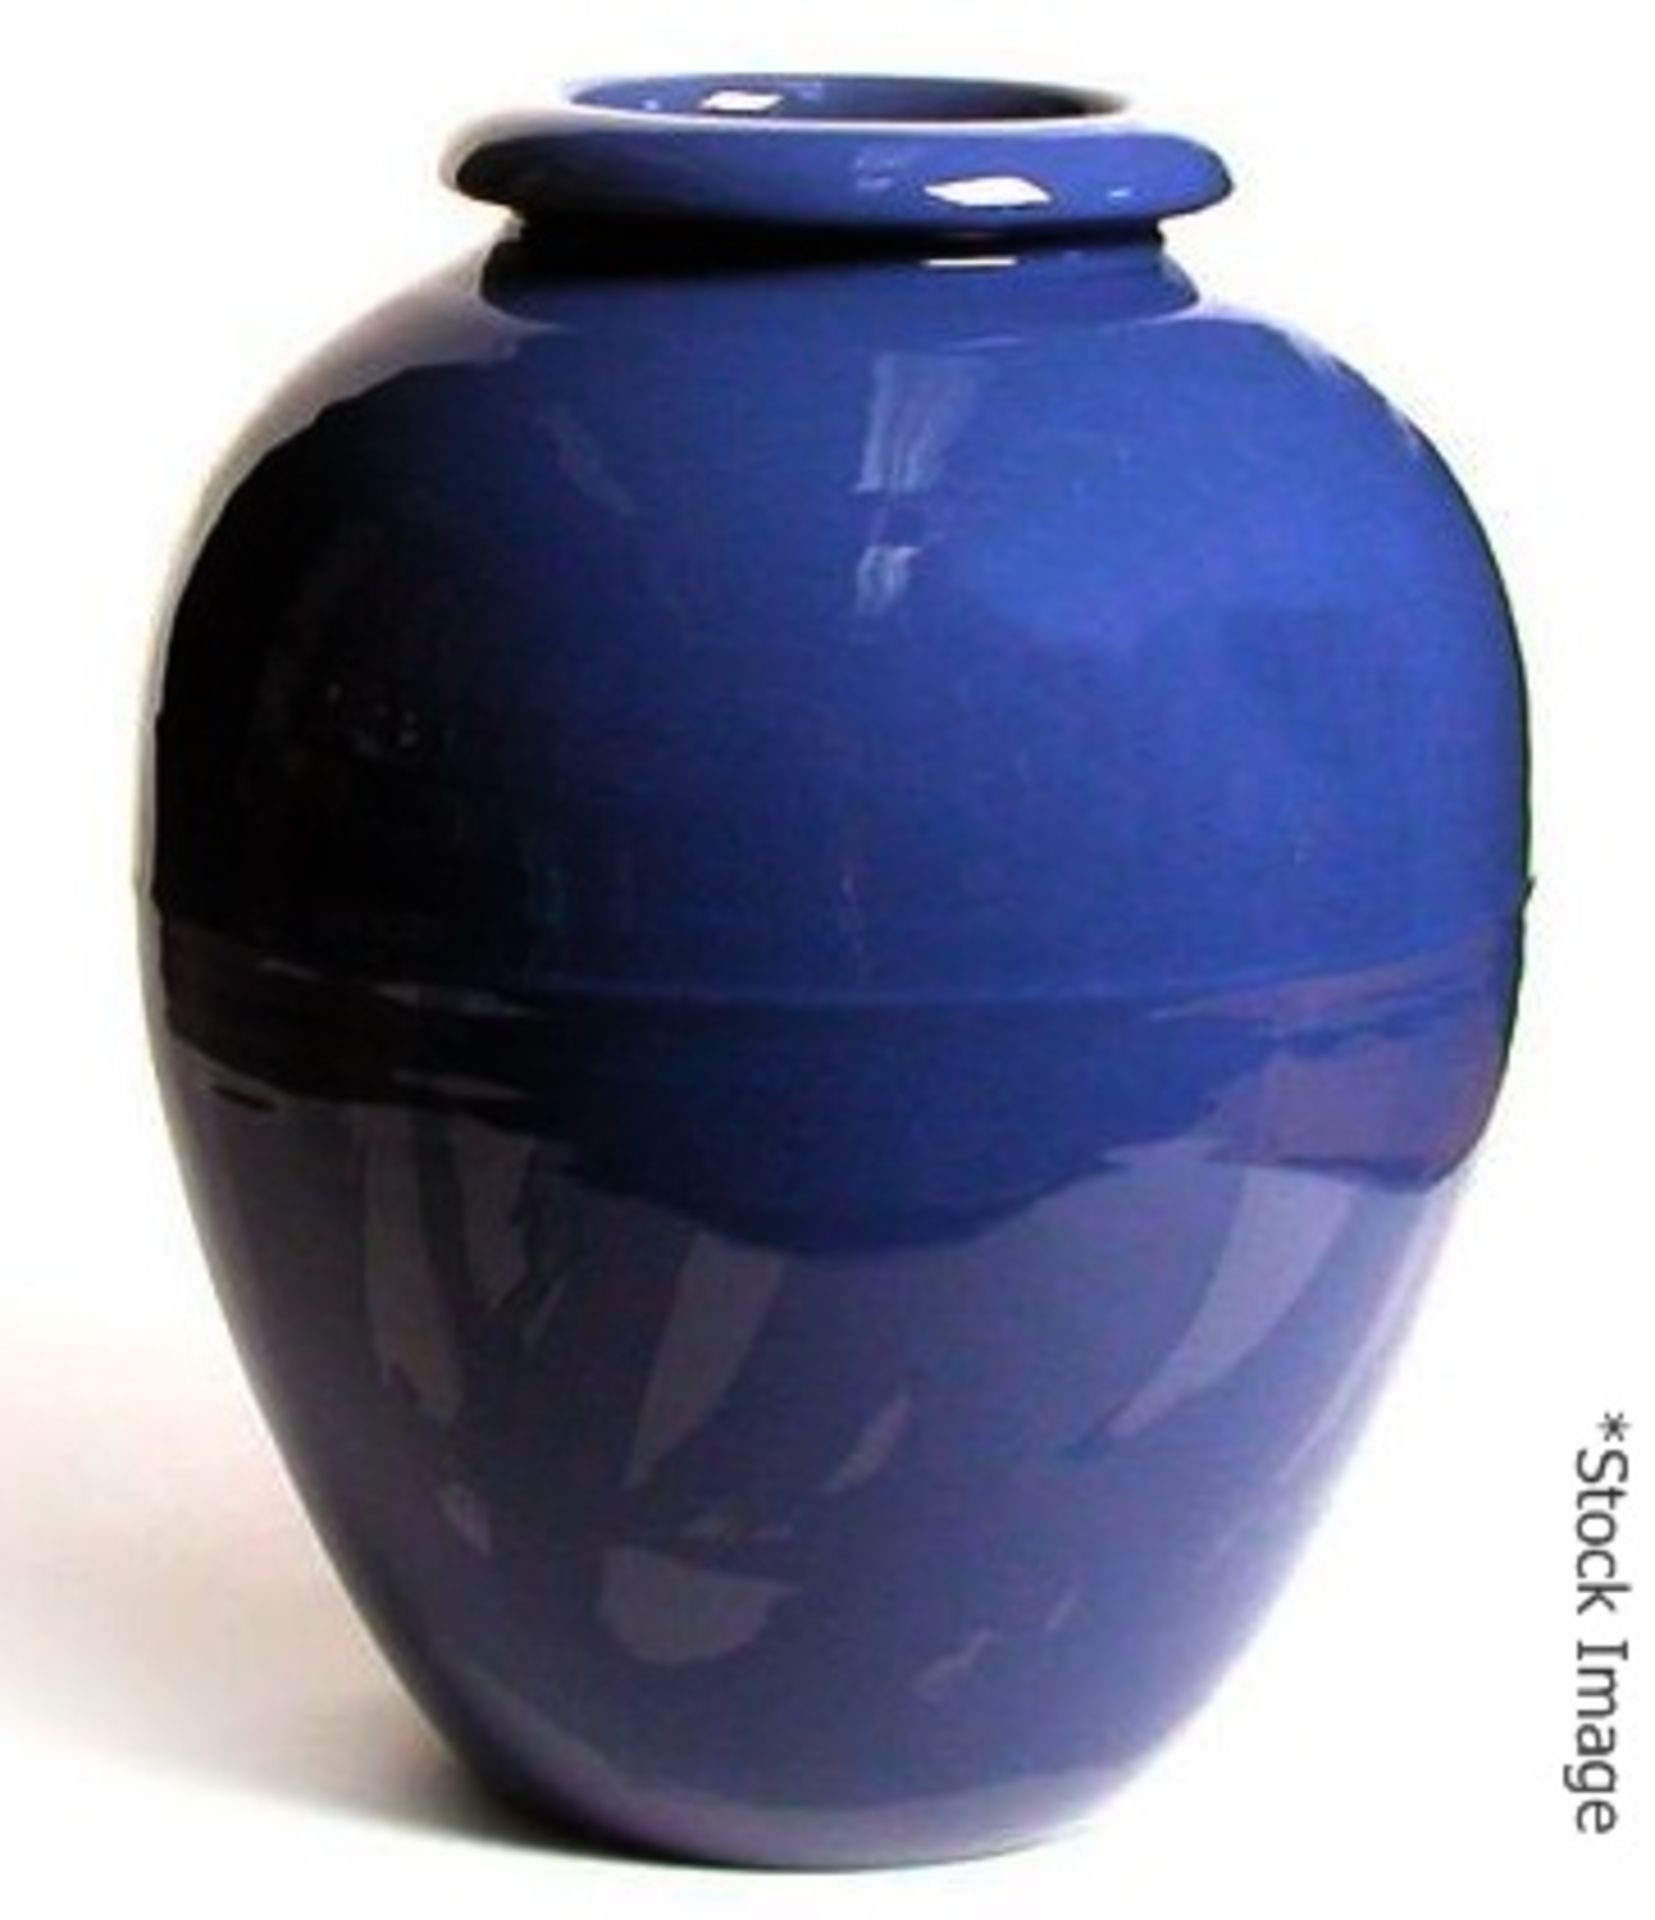 1 x BAUER POTTERY LOS ANGELES Large 22 Inch Oil Jar In Blue (Circa 2000) - Original Price £700.00